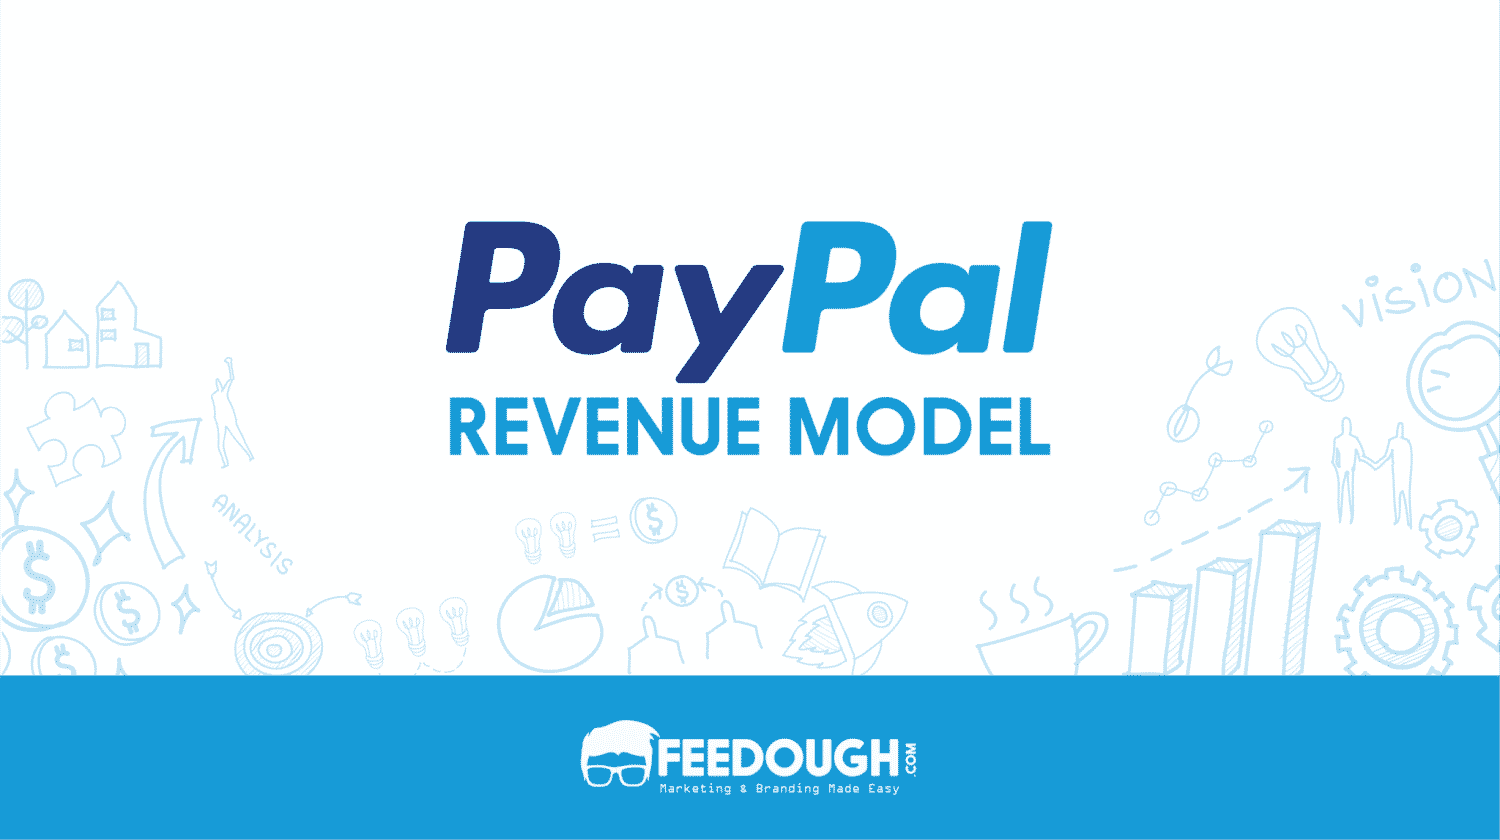 How Does PayPal Make Money? Paypal Revenue Model